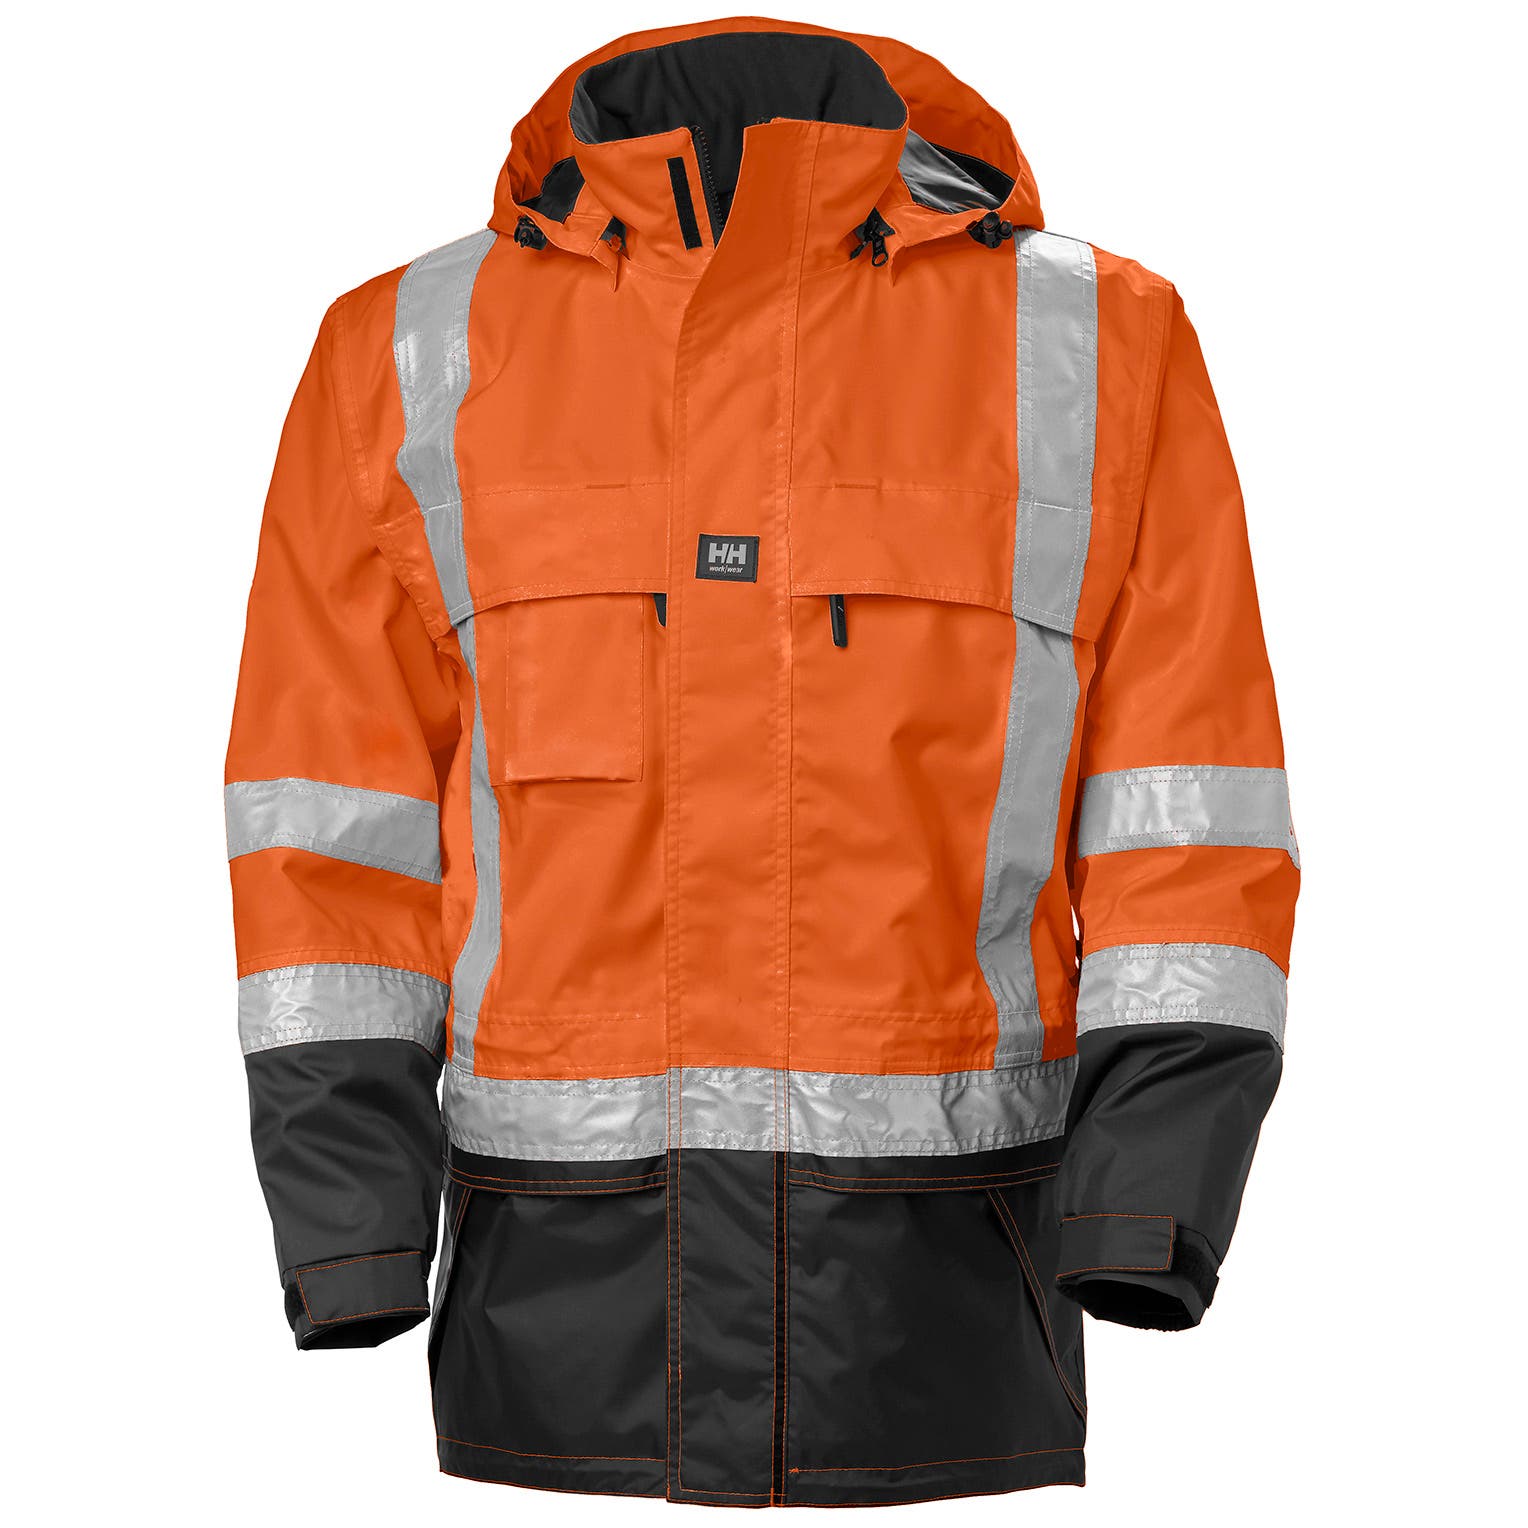 Helly Hansen Men's Potsdam Oxford Polyester ANSI Jacket in Orange from the front